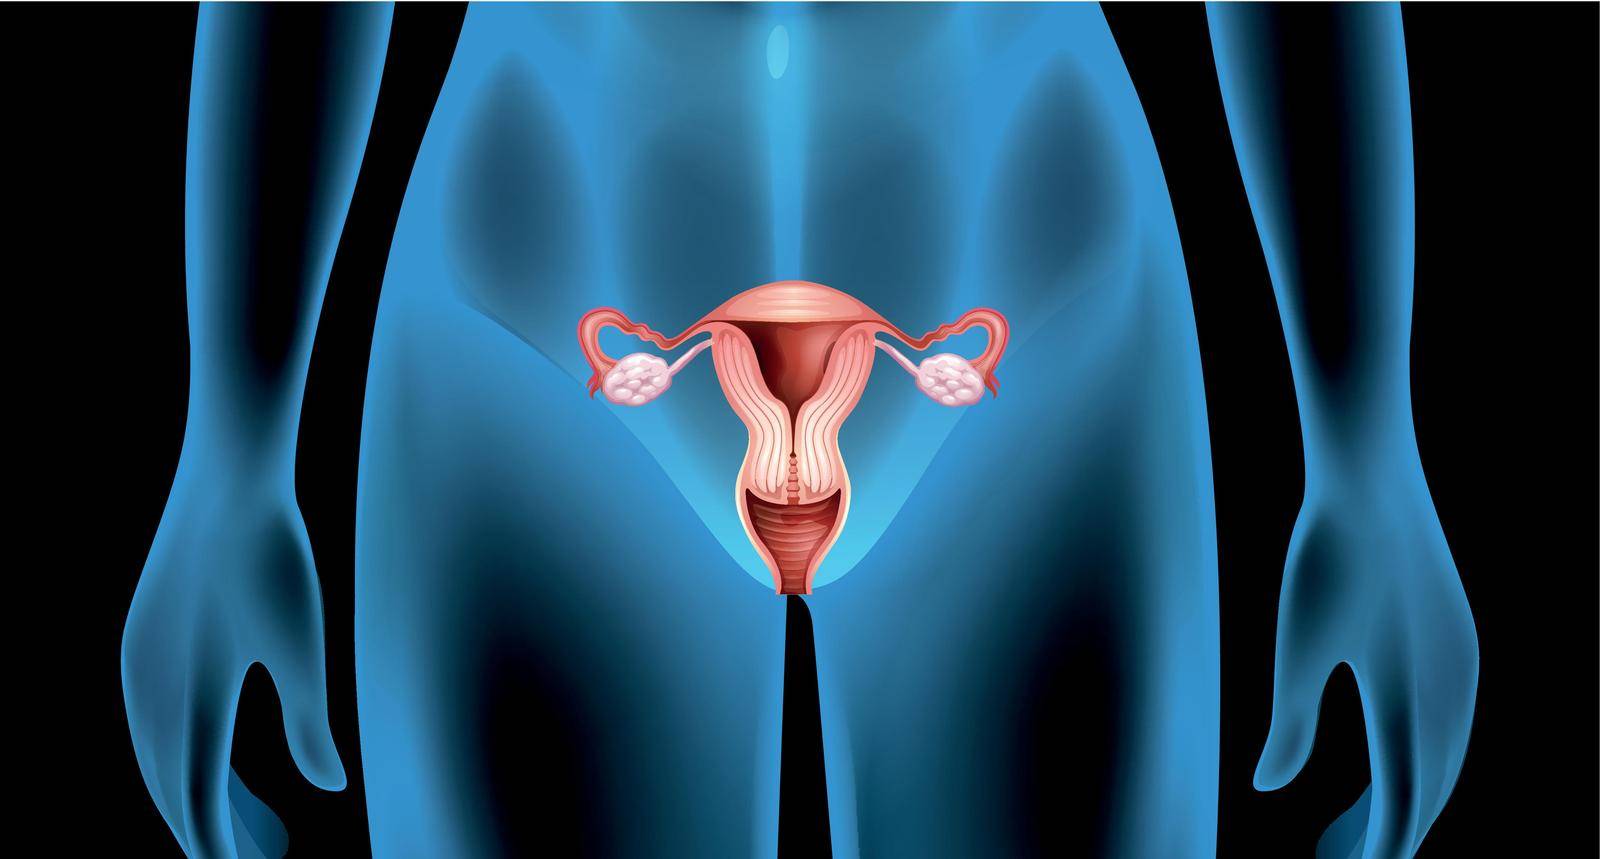 Reproductive organ of the female body by iimages